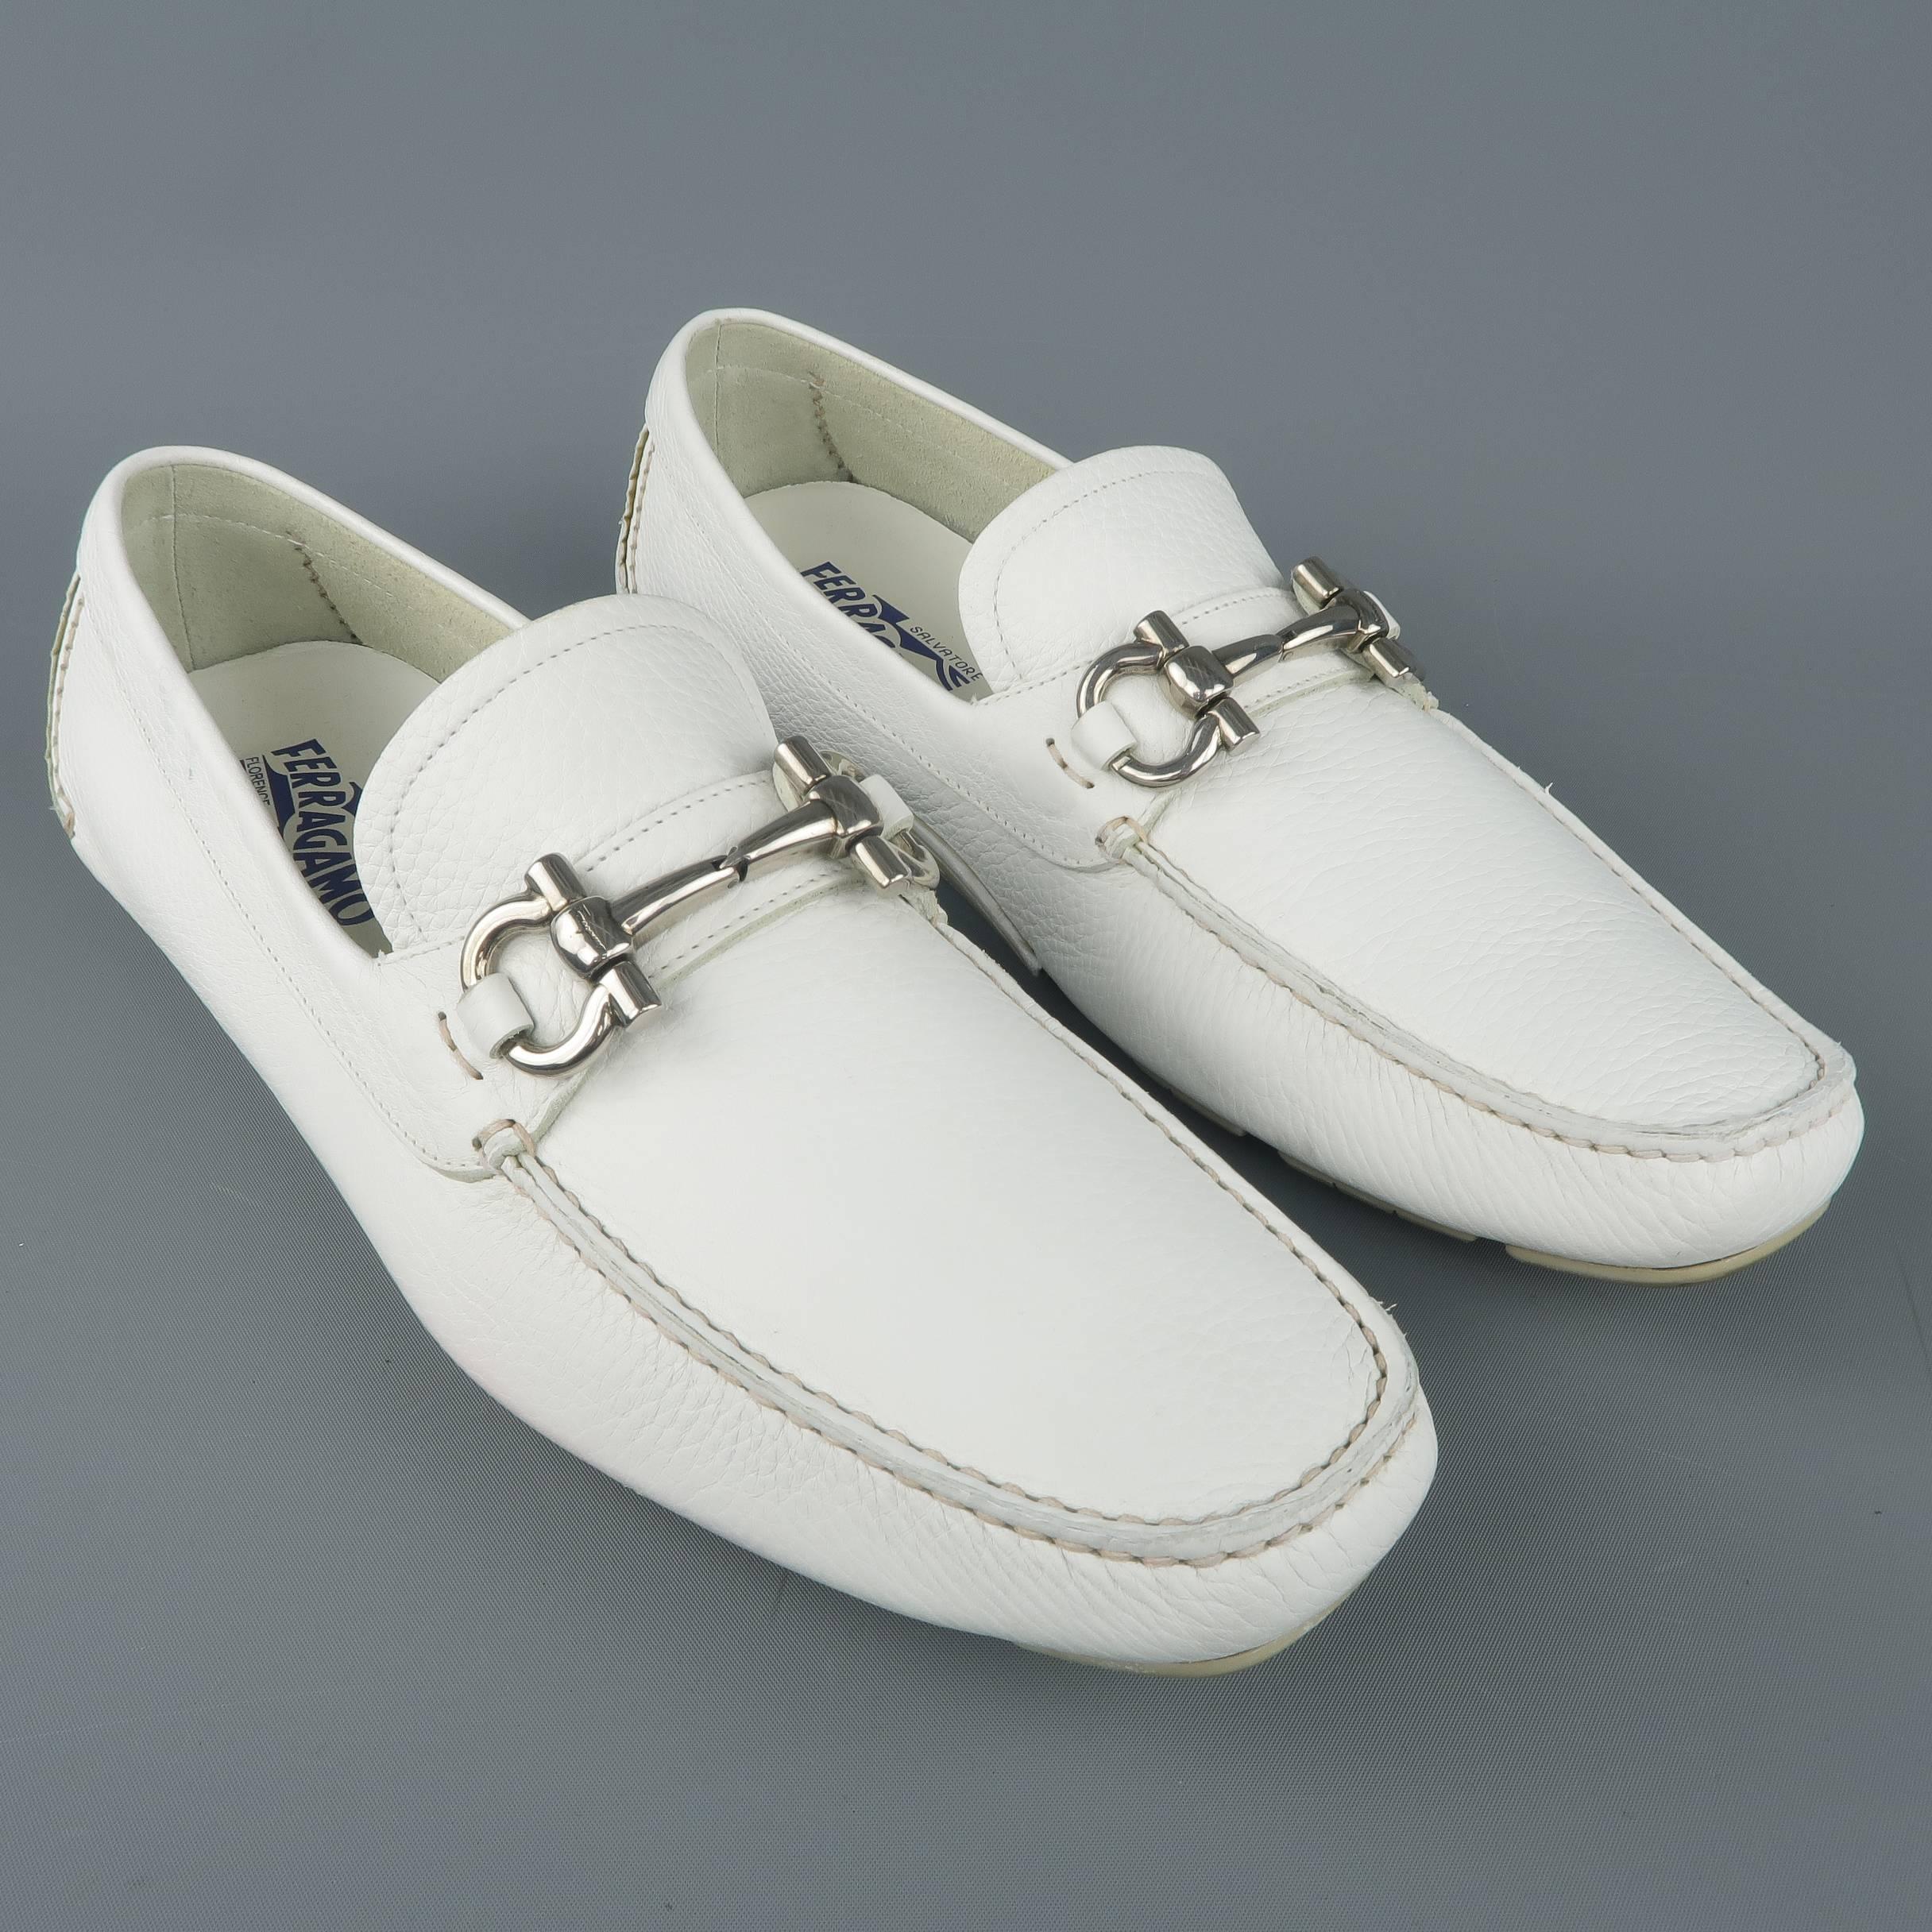 SALVATORE FERRAGAMO loafer comes in white textured leather with a silver tone horsebit detail and driver sole. Scruffs throughout. As-is. Made in Italy.
 
Good Pre-Owned Condition.
Marked: UK 10
 
Outsole: 12 x 4 in.
